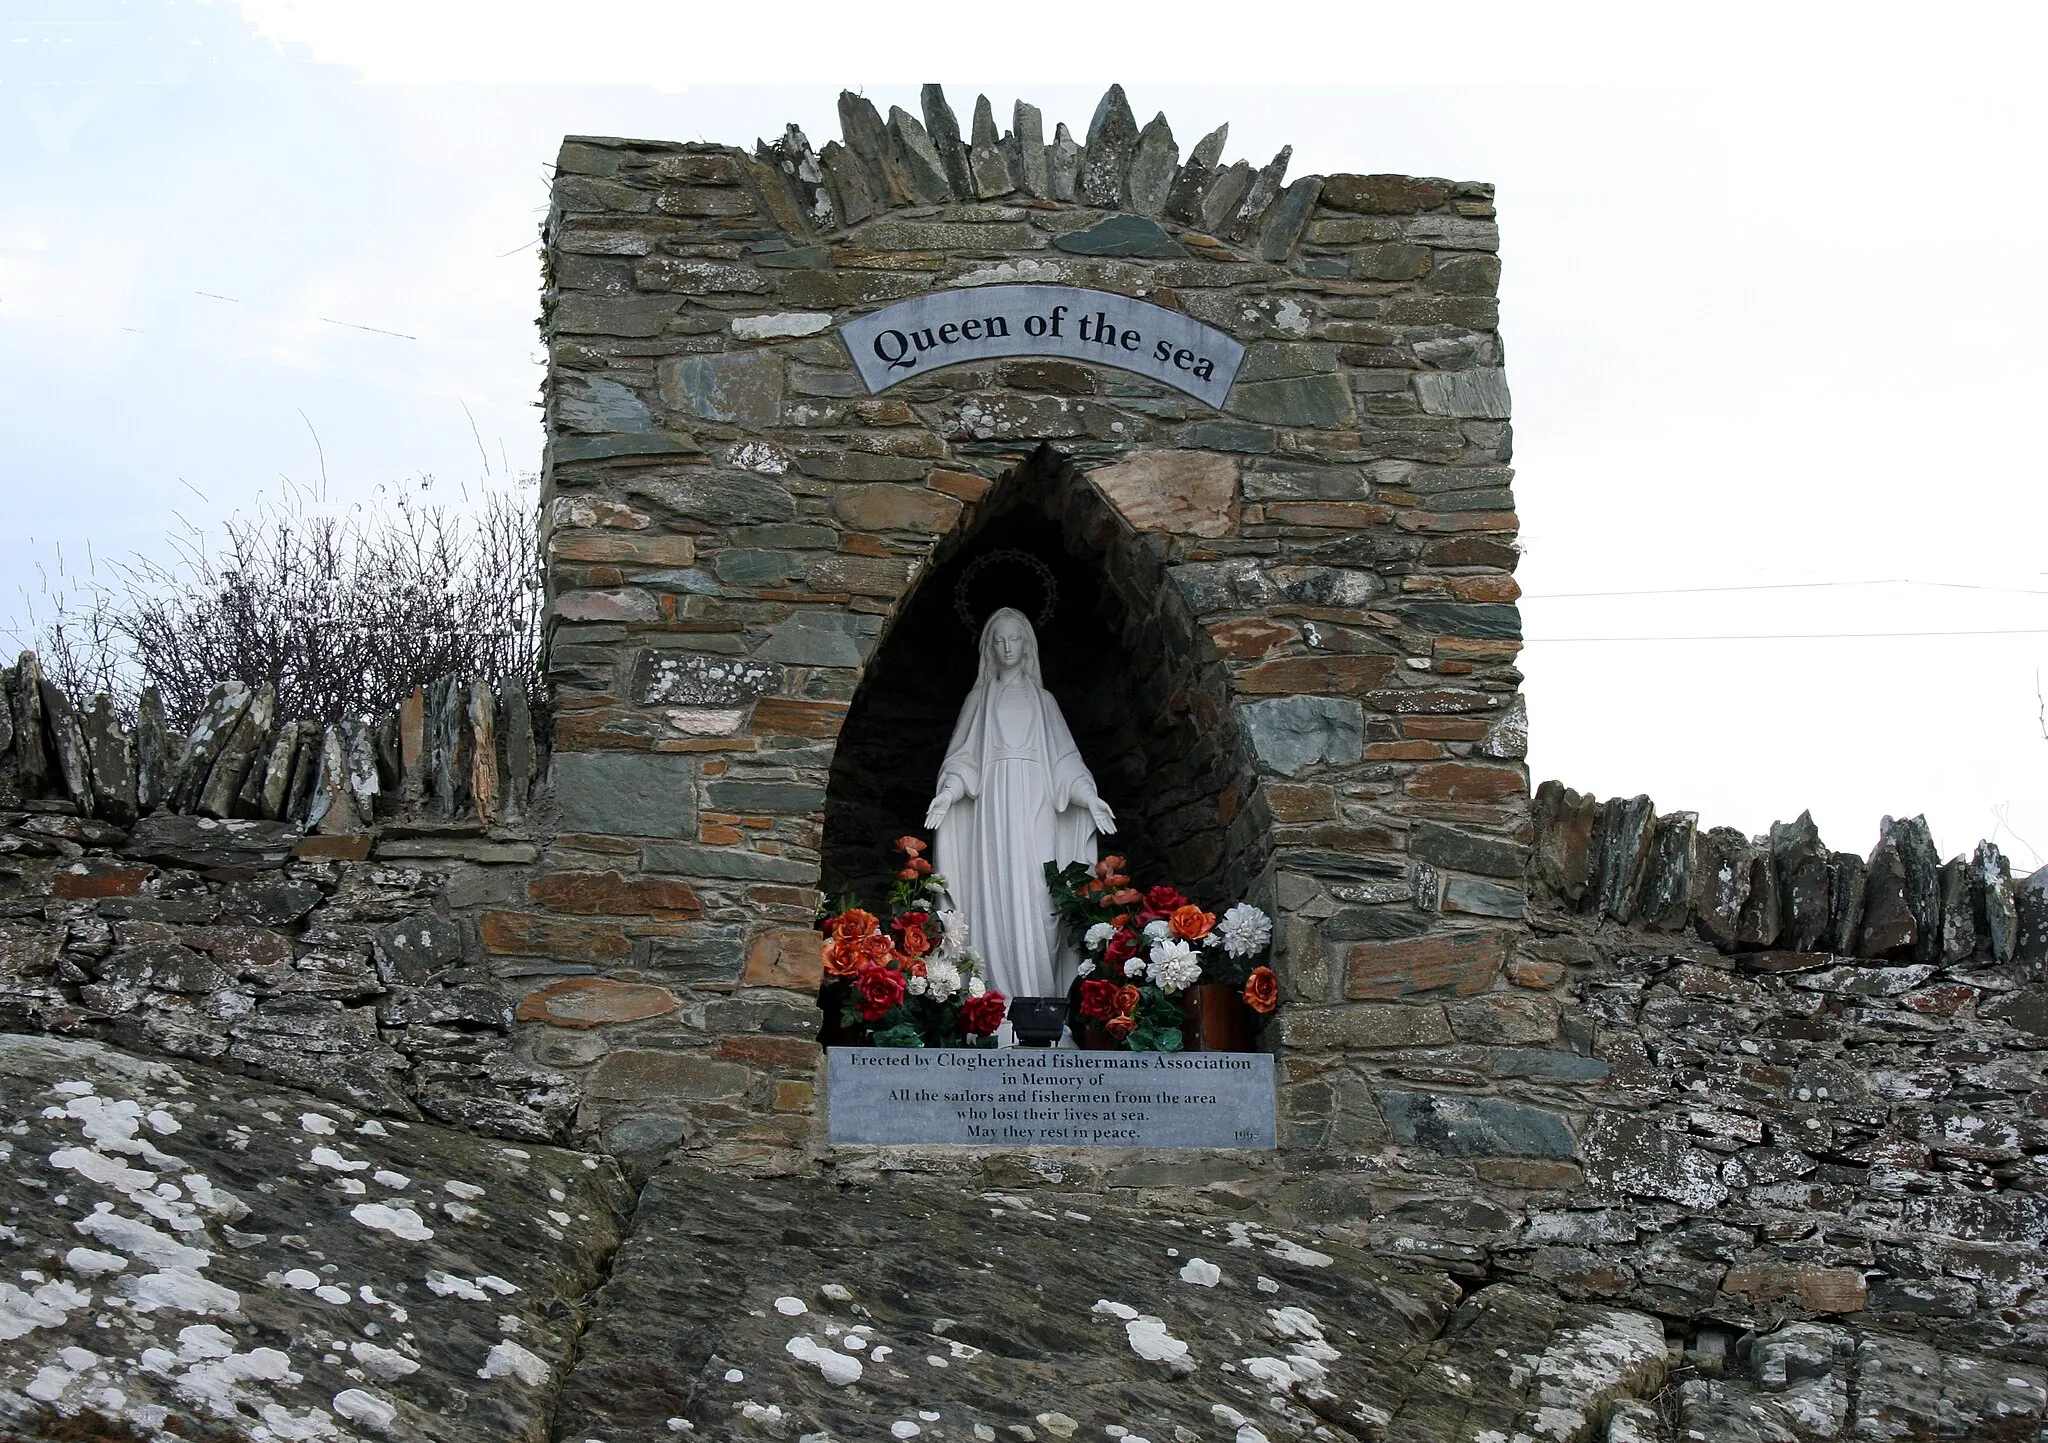 Photo showing: Queen of the sea memorial to those lost at sea, Clogher Head